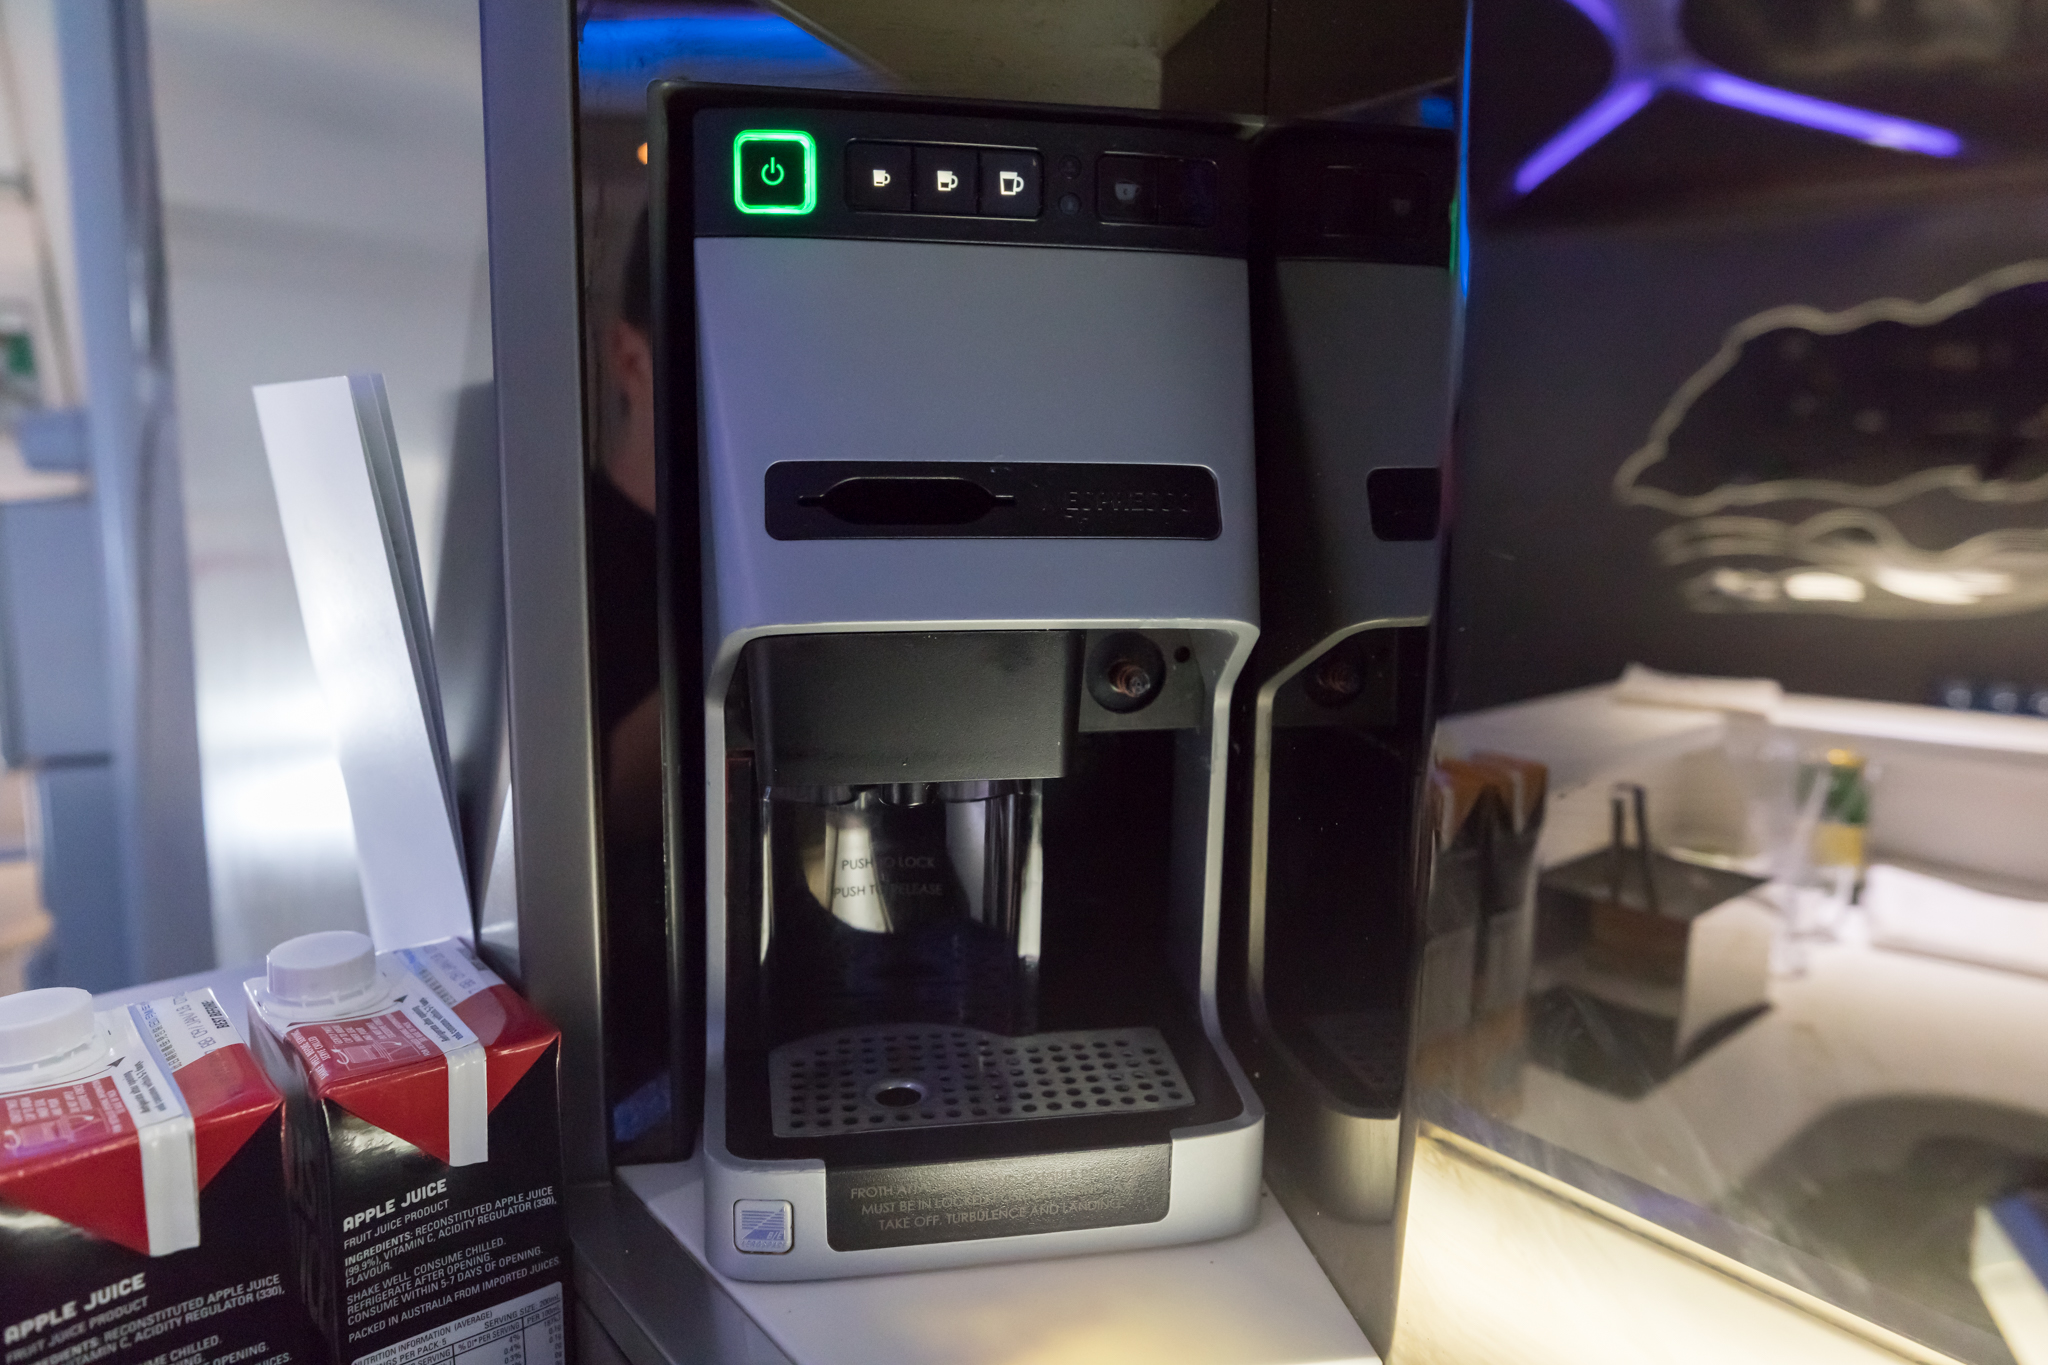 a coffee machine with a green light